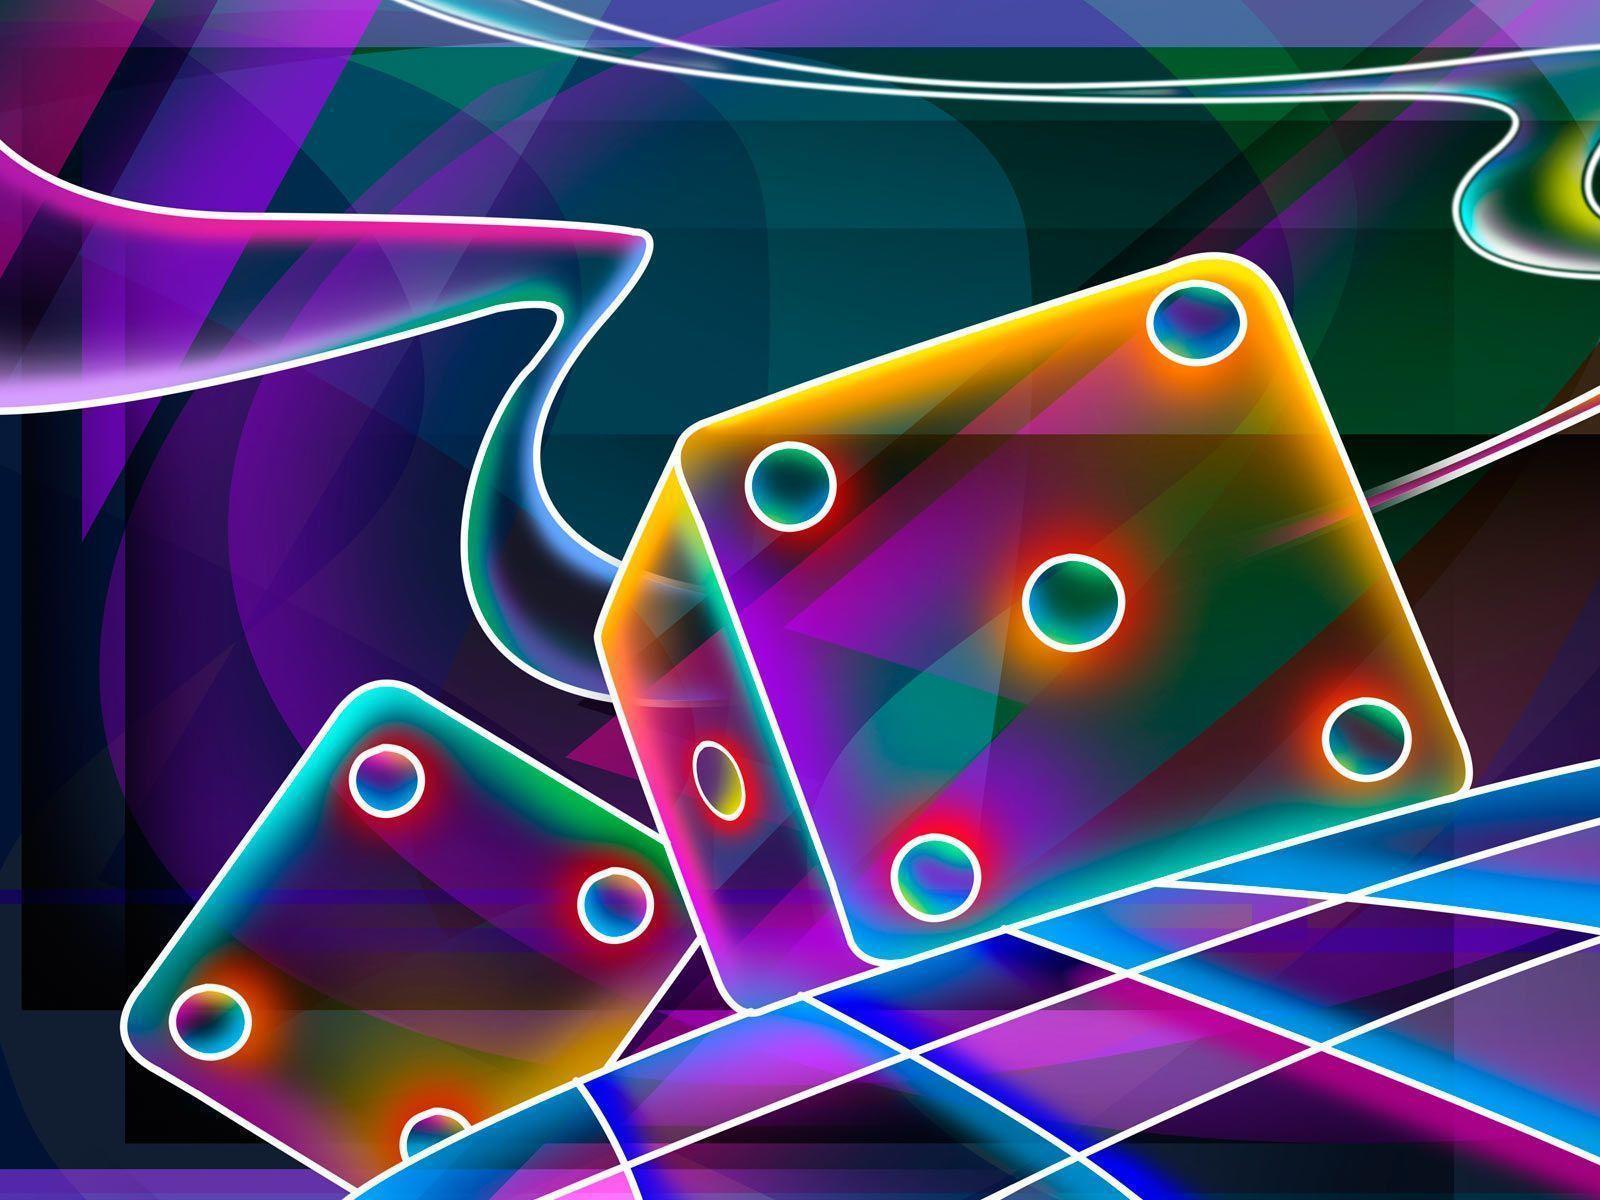 Colorful 3D Abstract Wallpaper Picture 5 HD Wallpaper. aduphoto